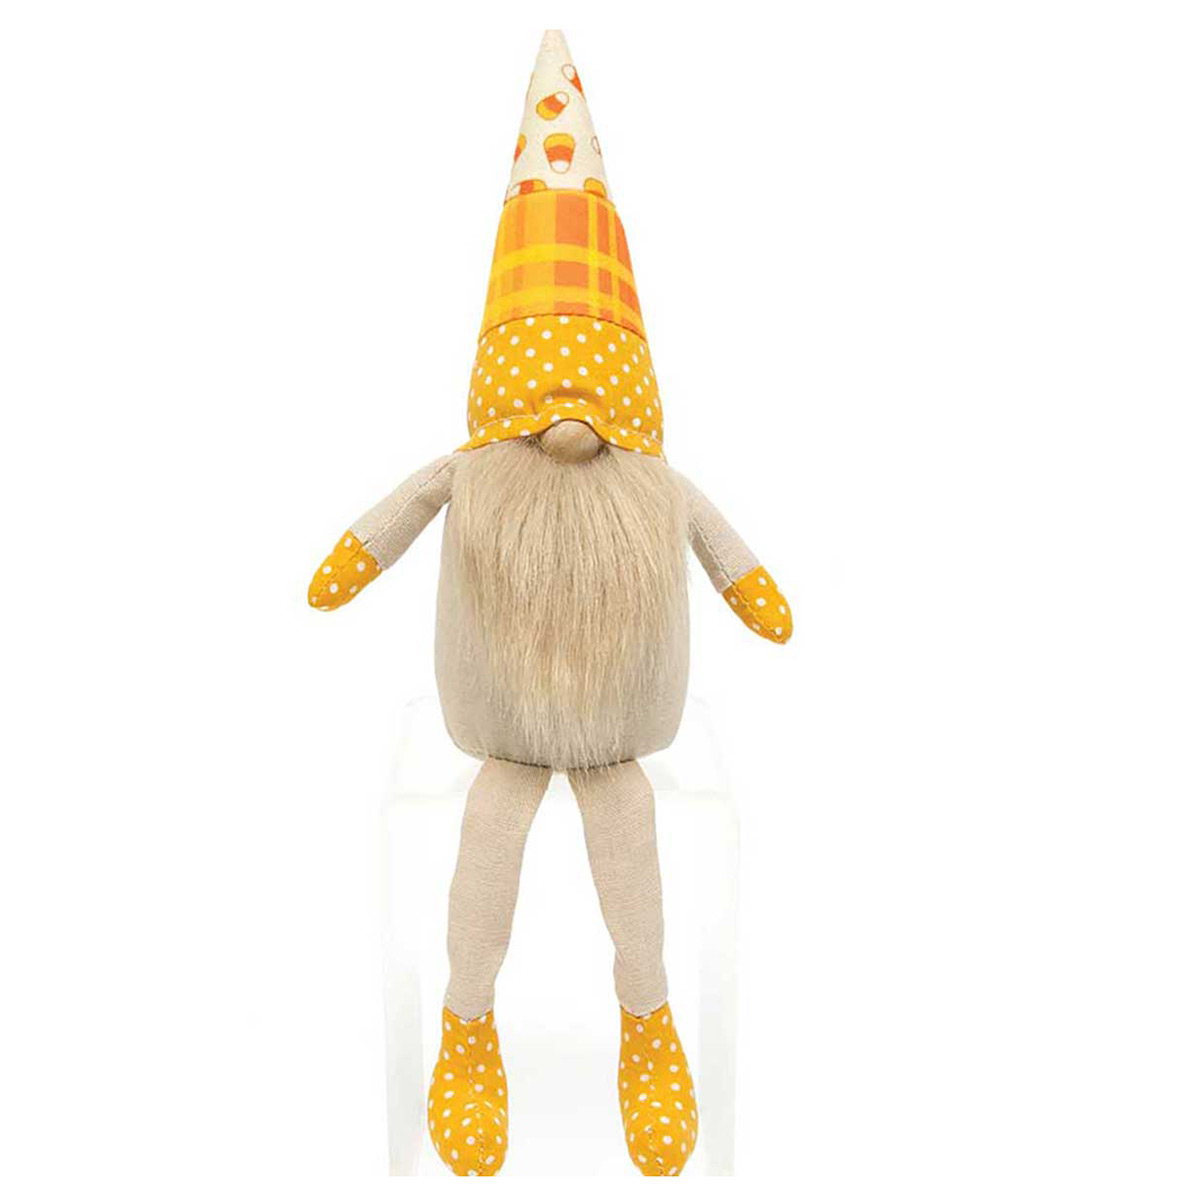 GNOME CANDY CORN WITH LEGS 3.5IN X 13IN MUSTARD/ORANGE